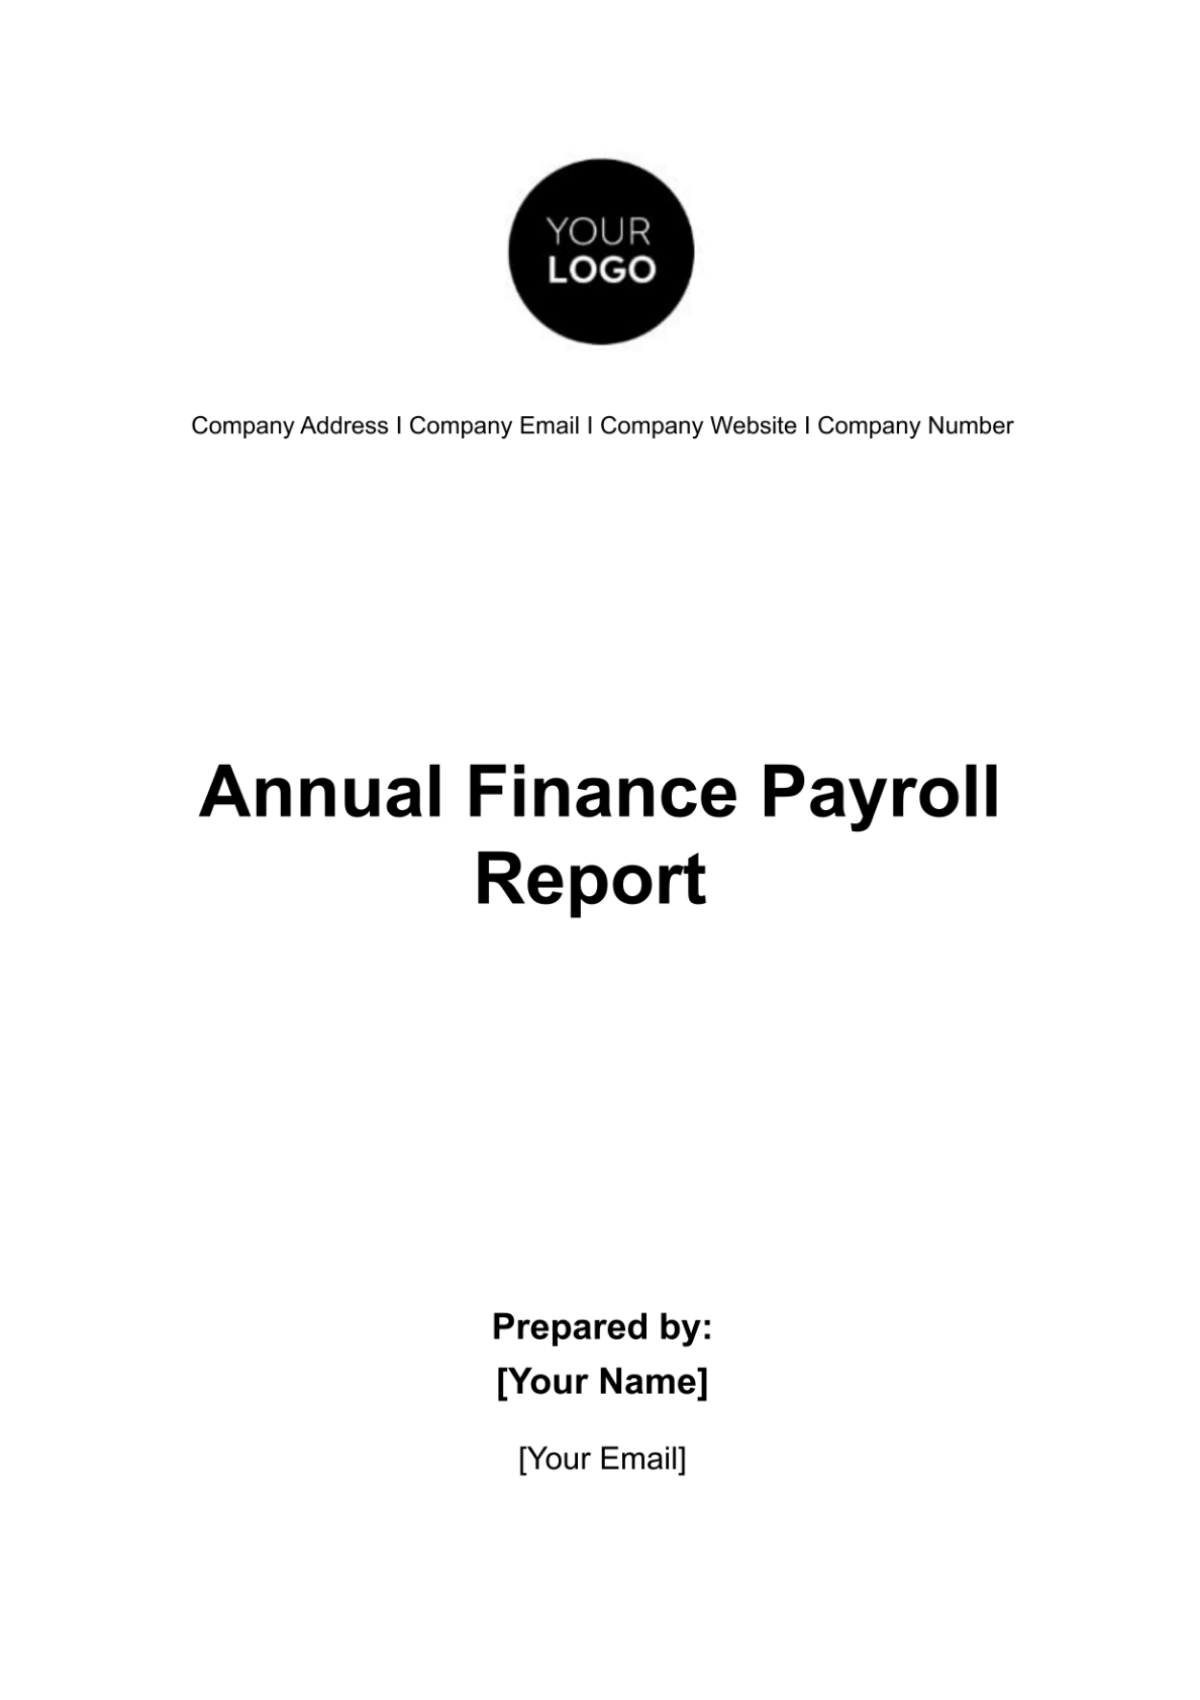 Annual Finance Payroll Report Template